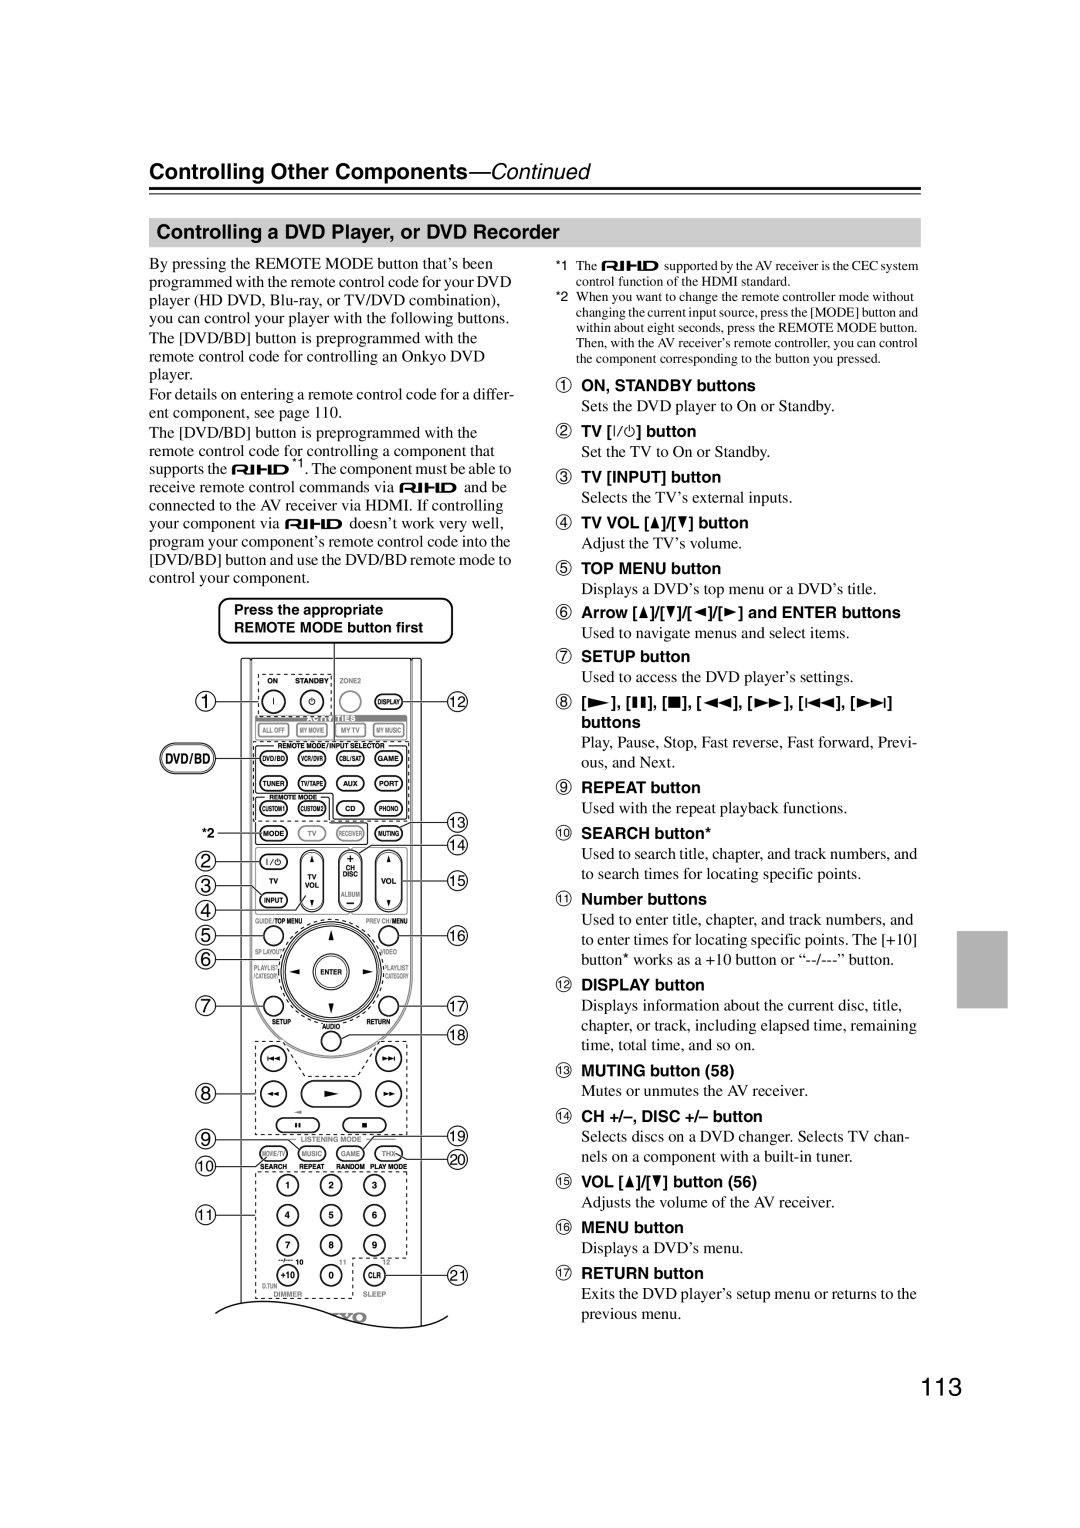 Onkyo TX-SR707 instruction manual bcdef g, m n o p q r, h is, Controlling a DVD Player, or DVD Recorder 